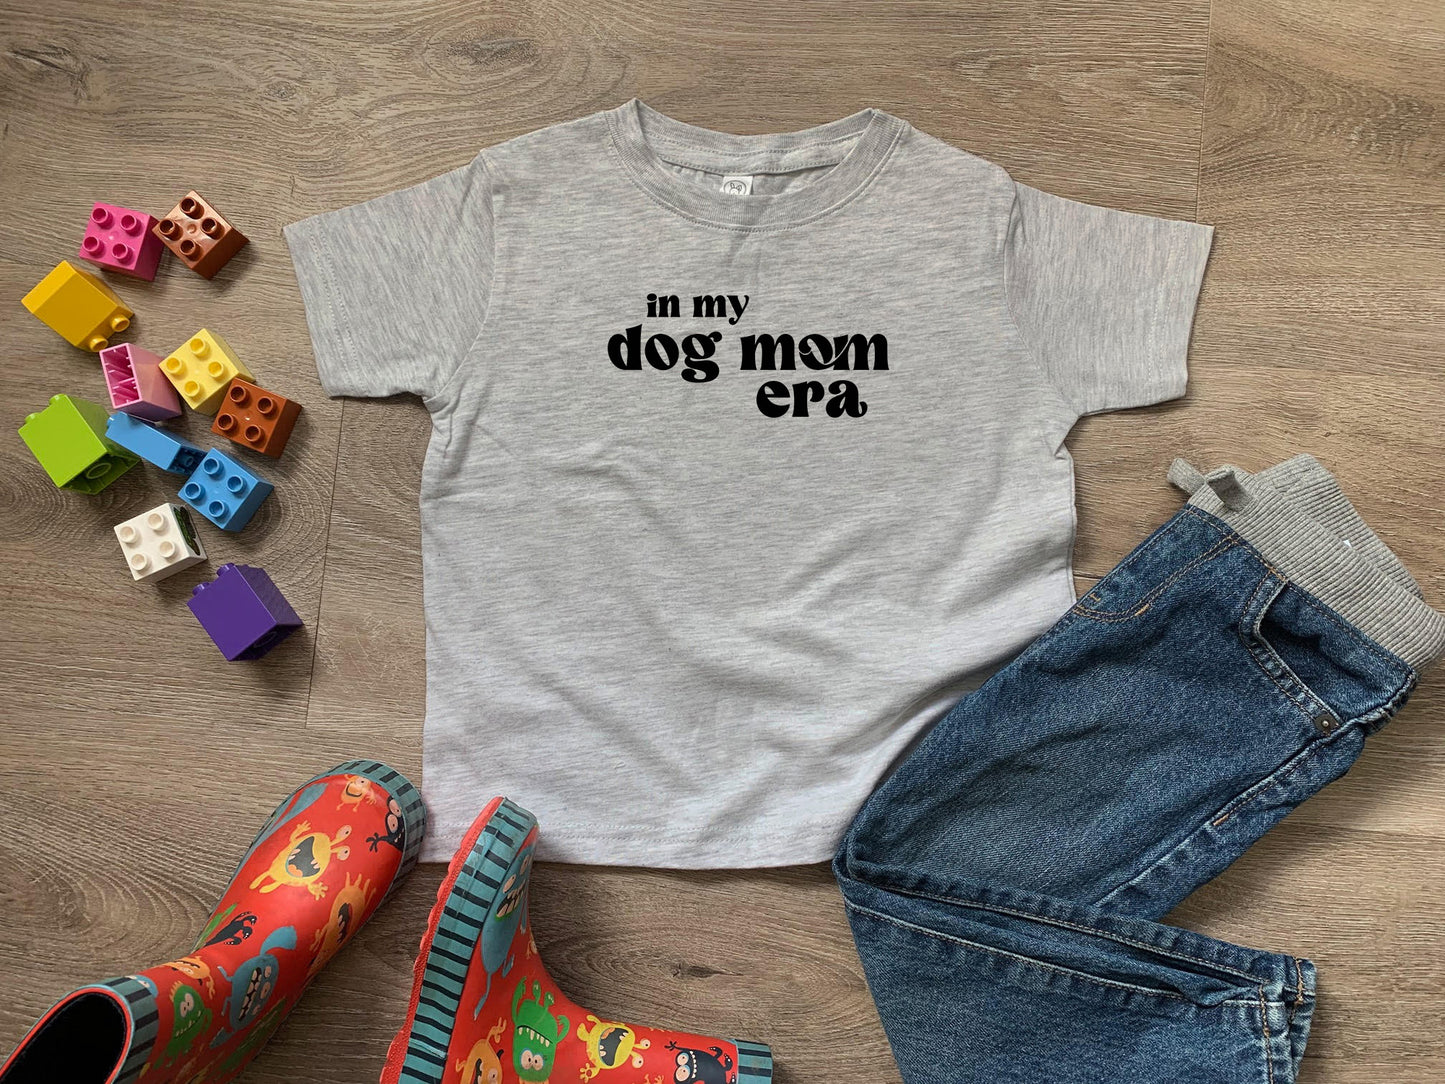 a t - shirt that says in my dog mom era next to a pair of